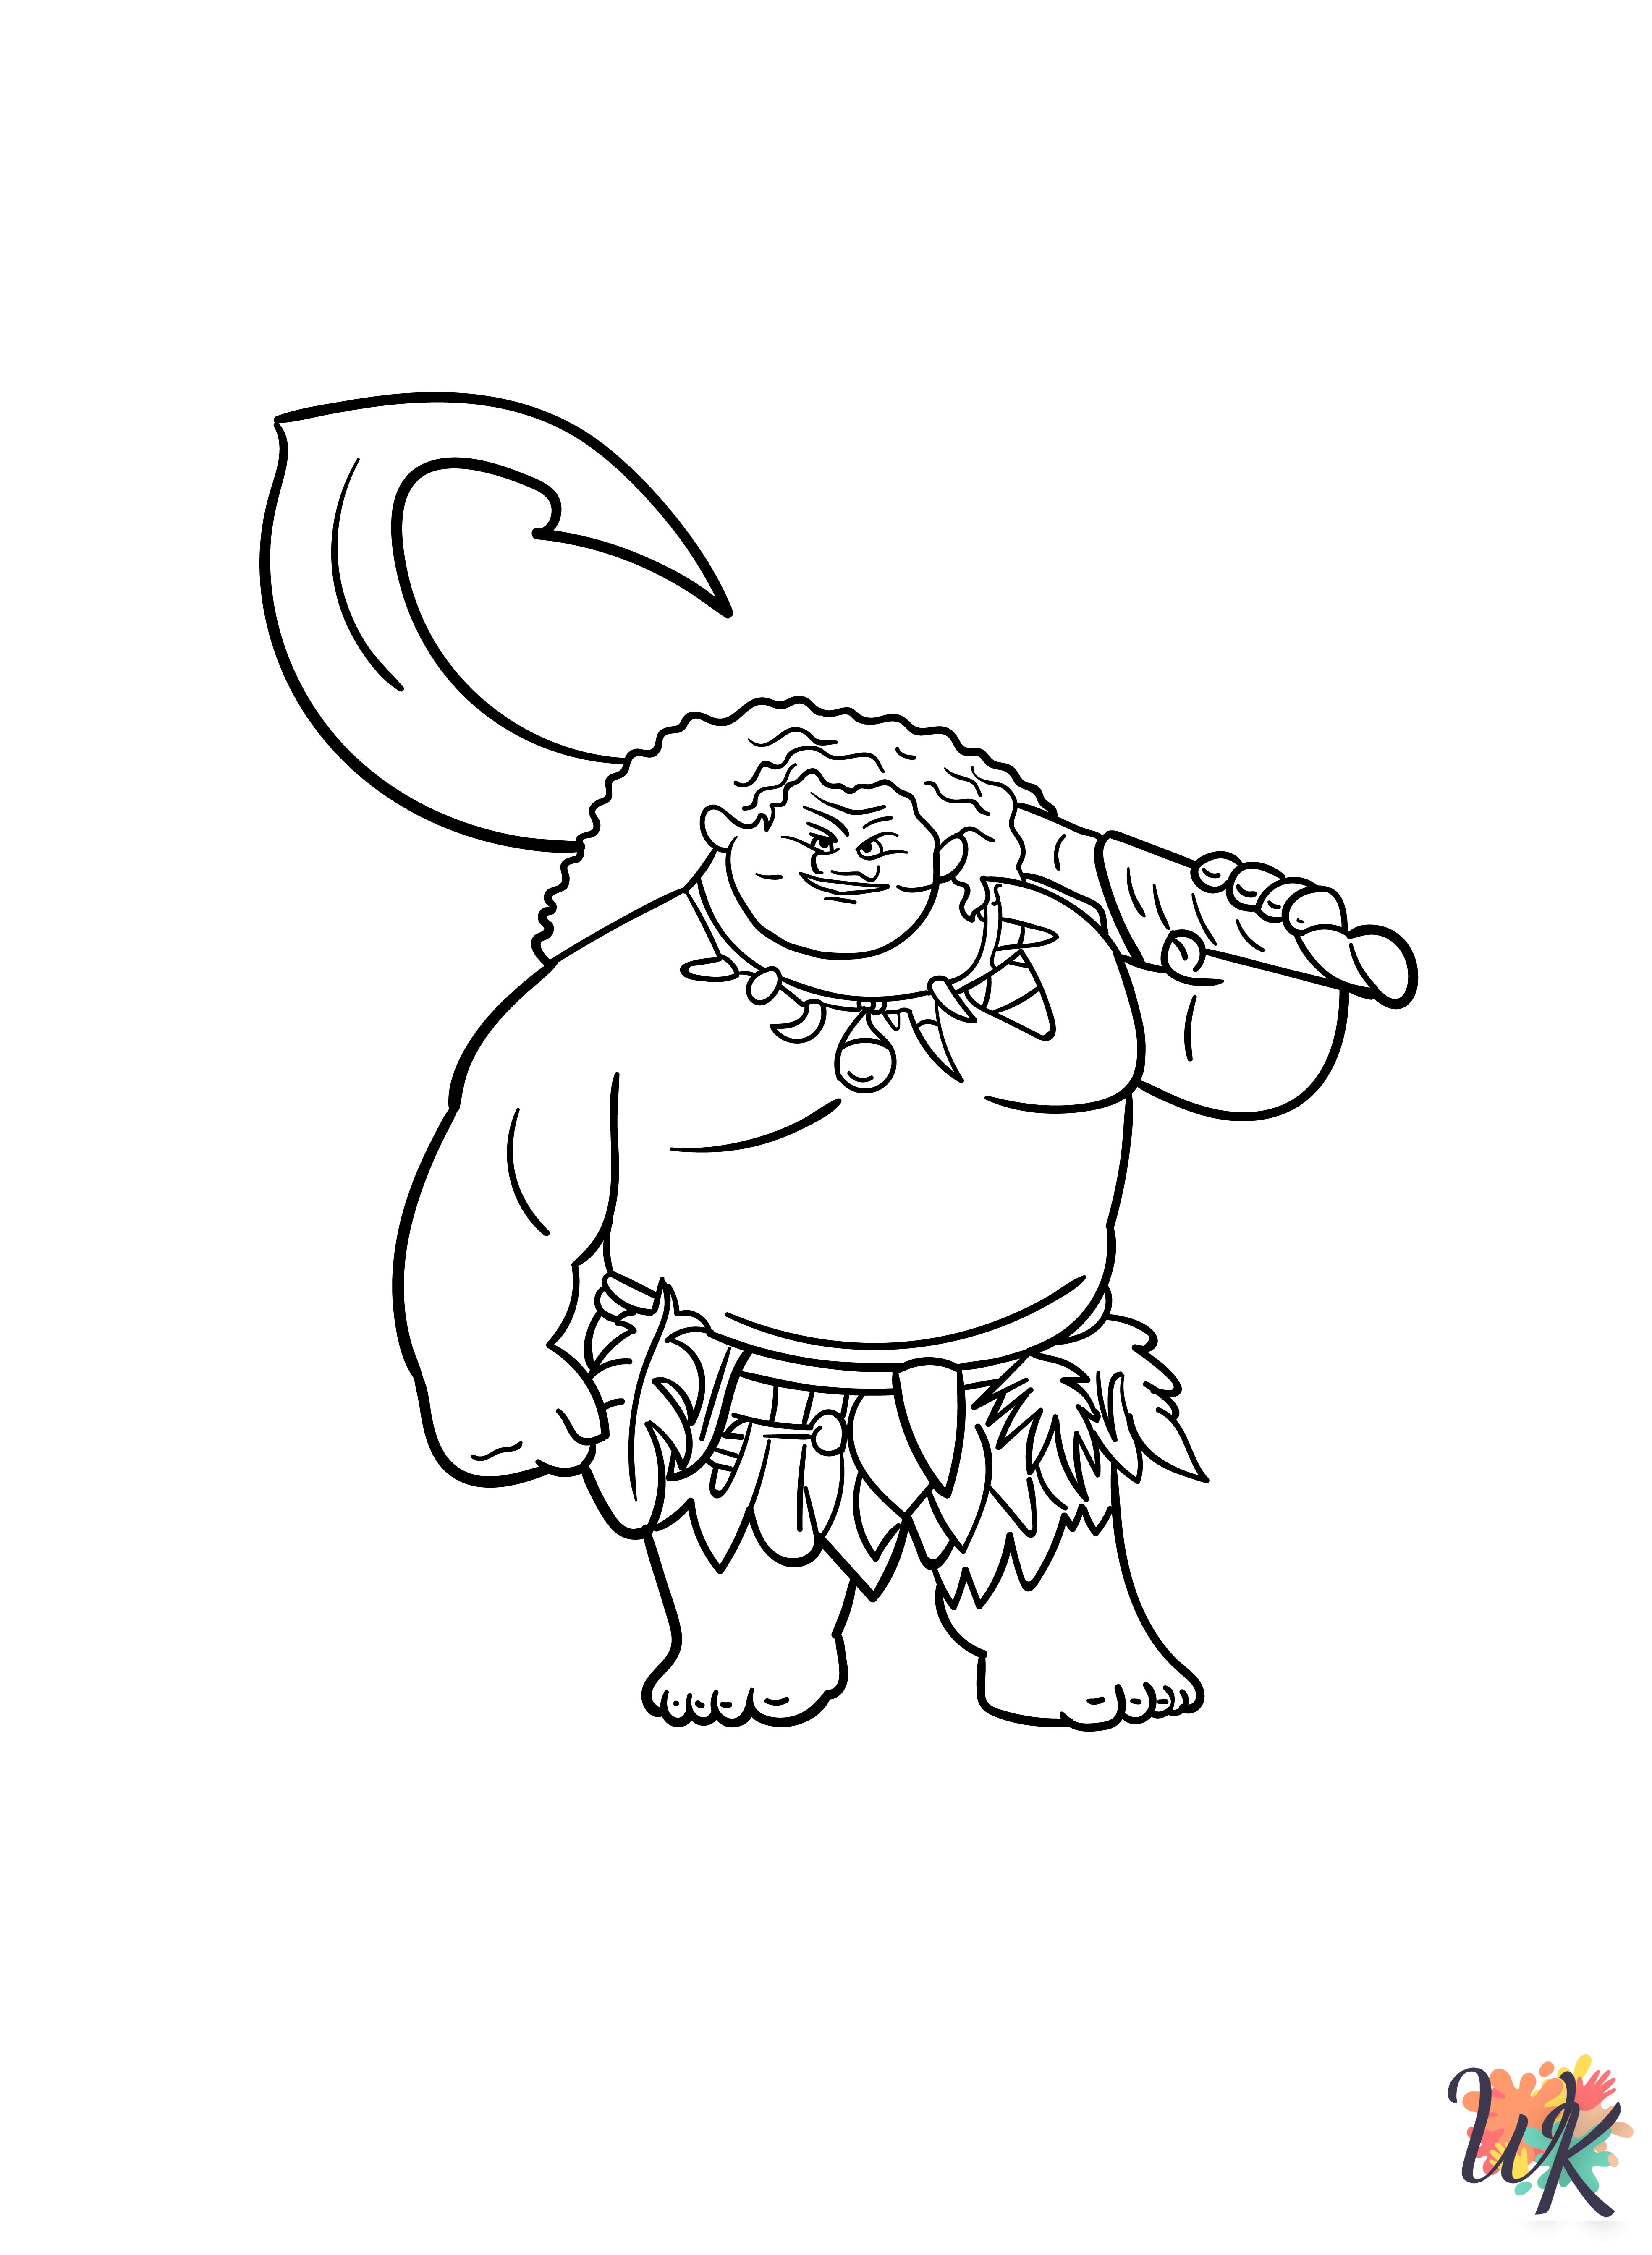 Moana coloring pages printable free